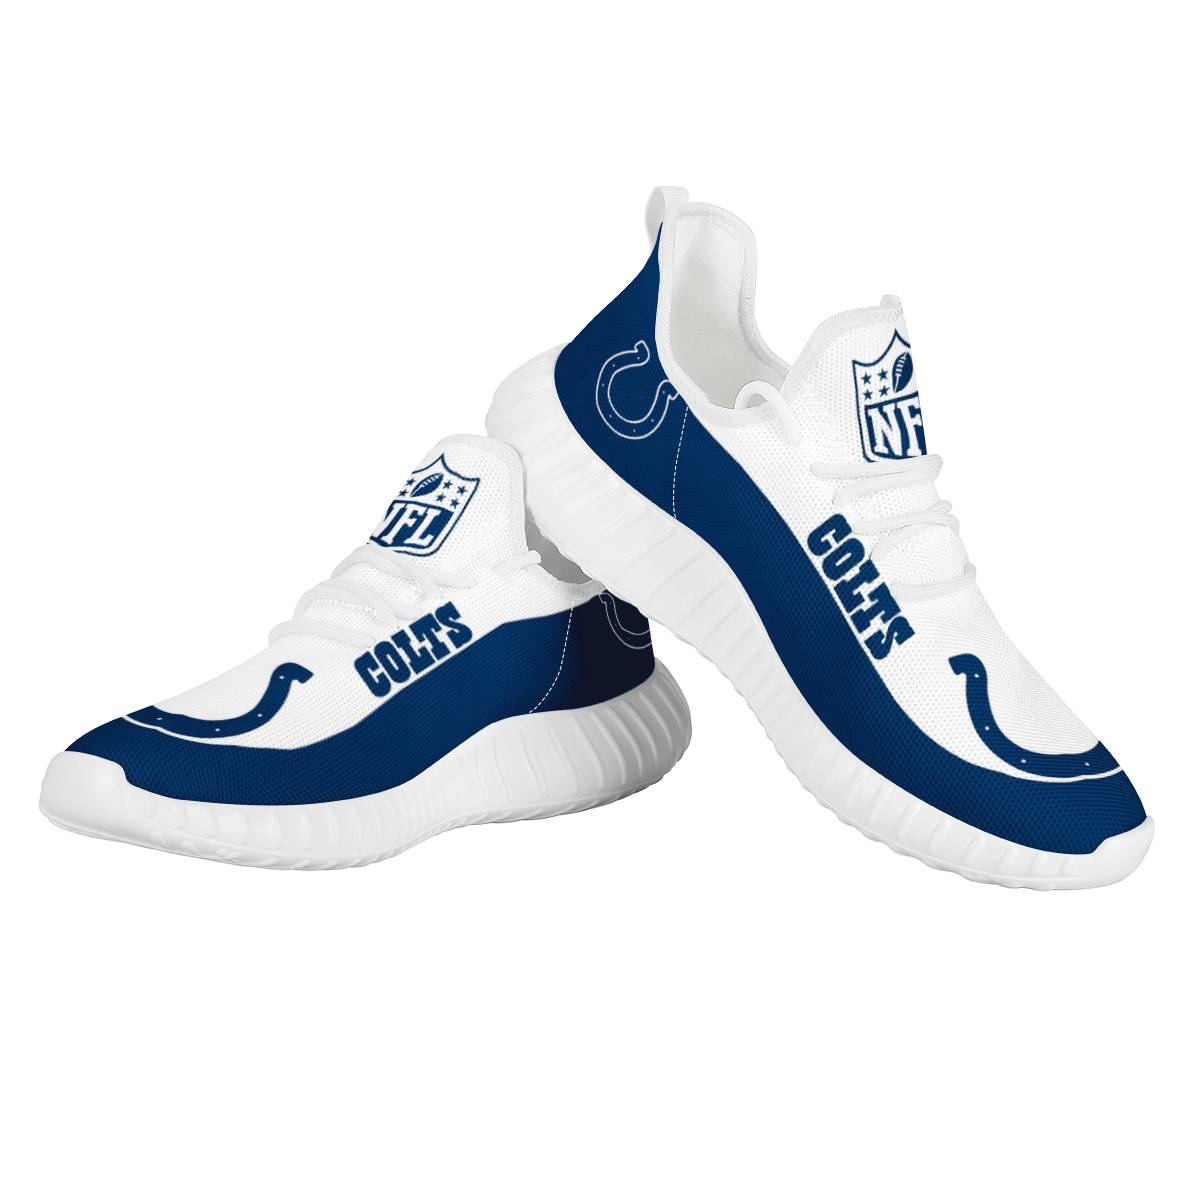 Men's Indianapolis Colts Mesh Knit Sneakers/Shoes 008